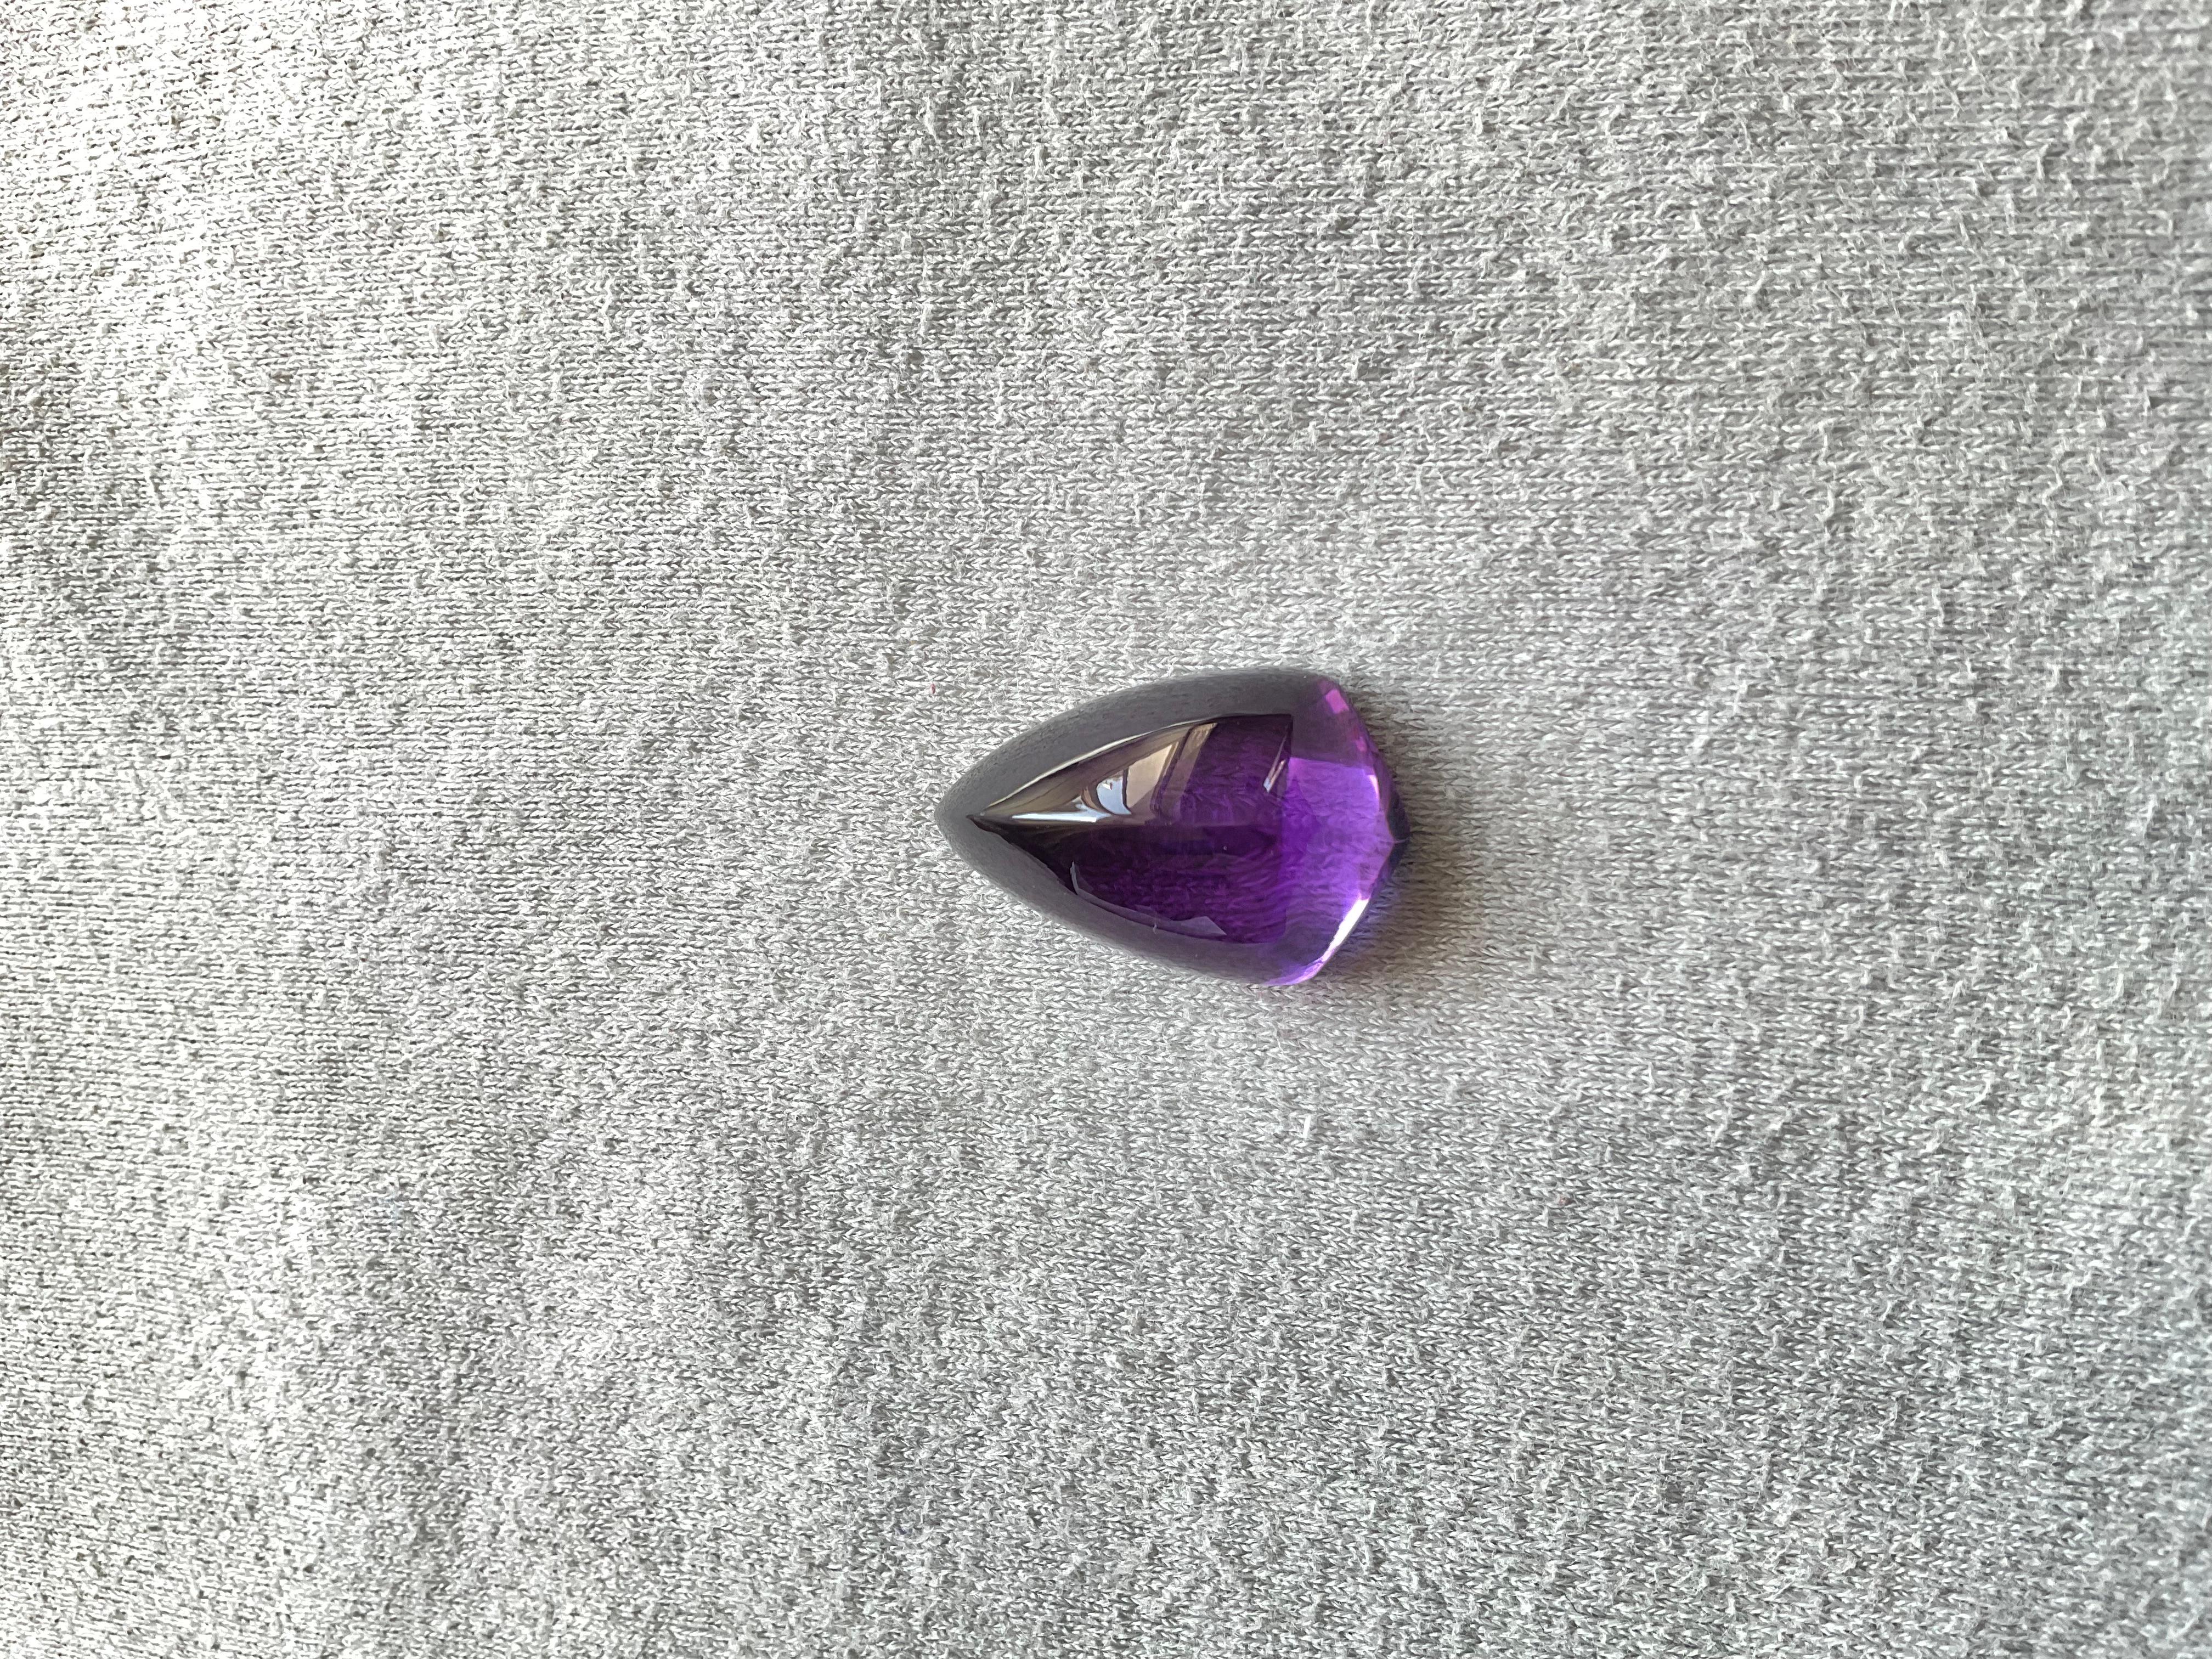 Shield Cut 26.46 Carat Amethyst Top Quality Fancy Shield Smooth Loose Gemstone For Jewelry  For Sale